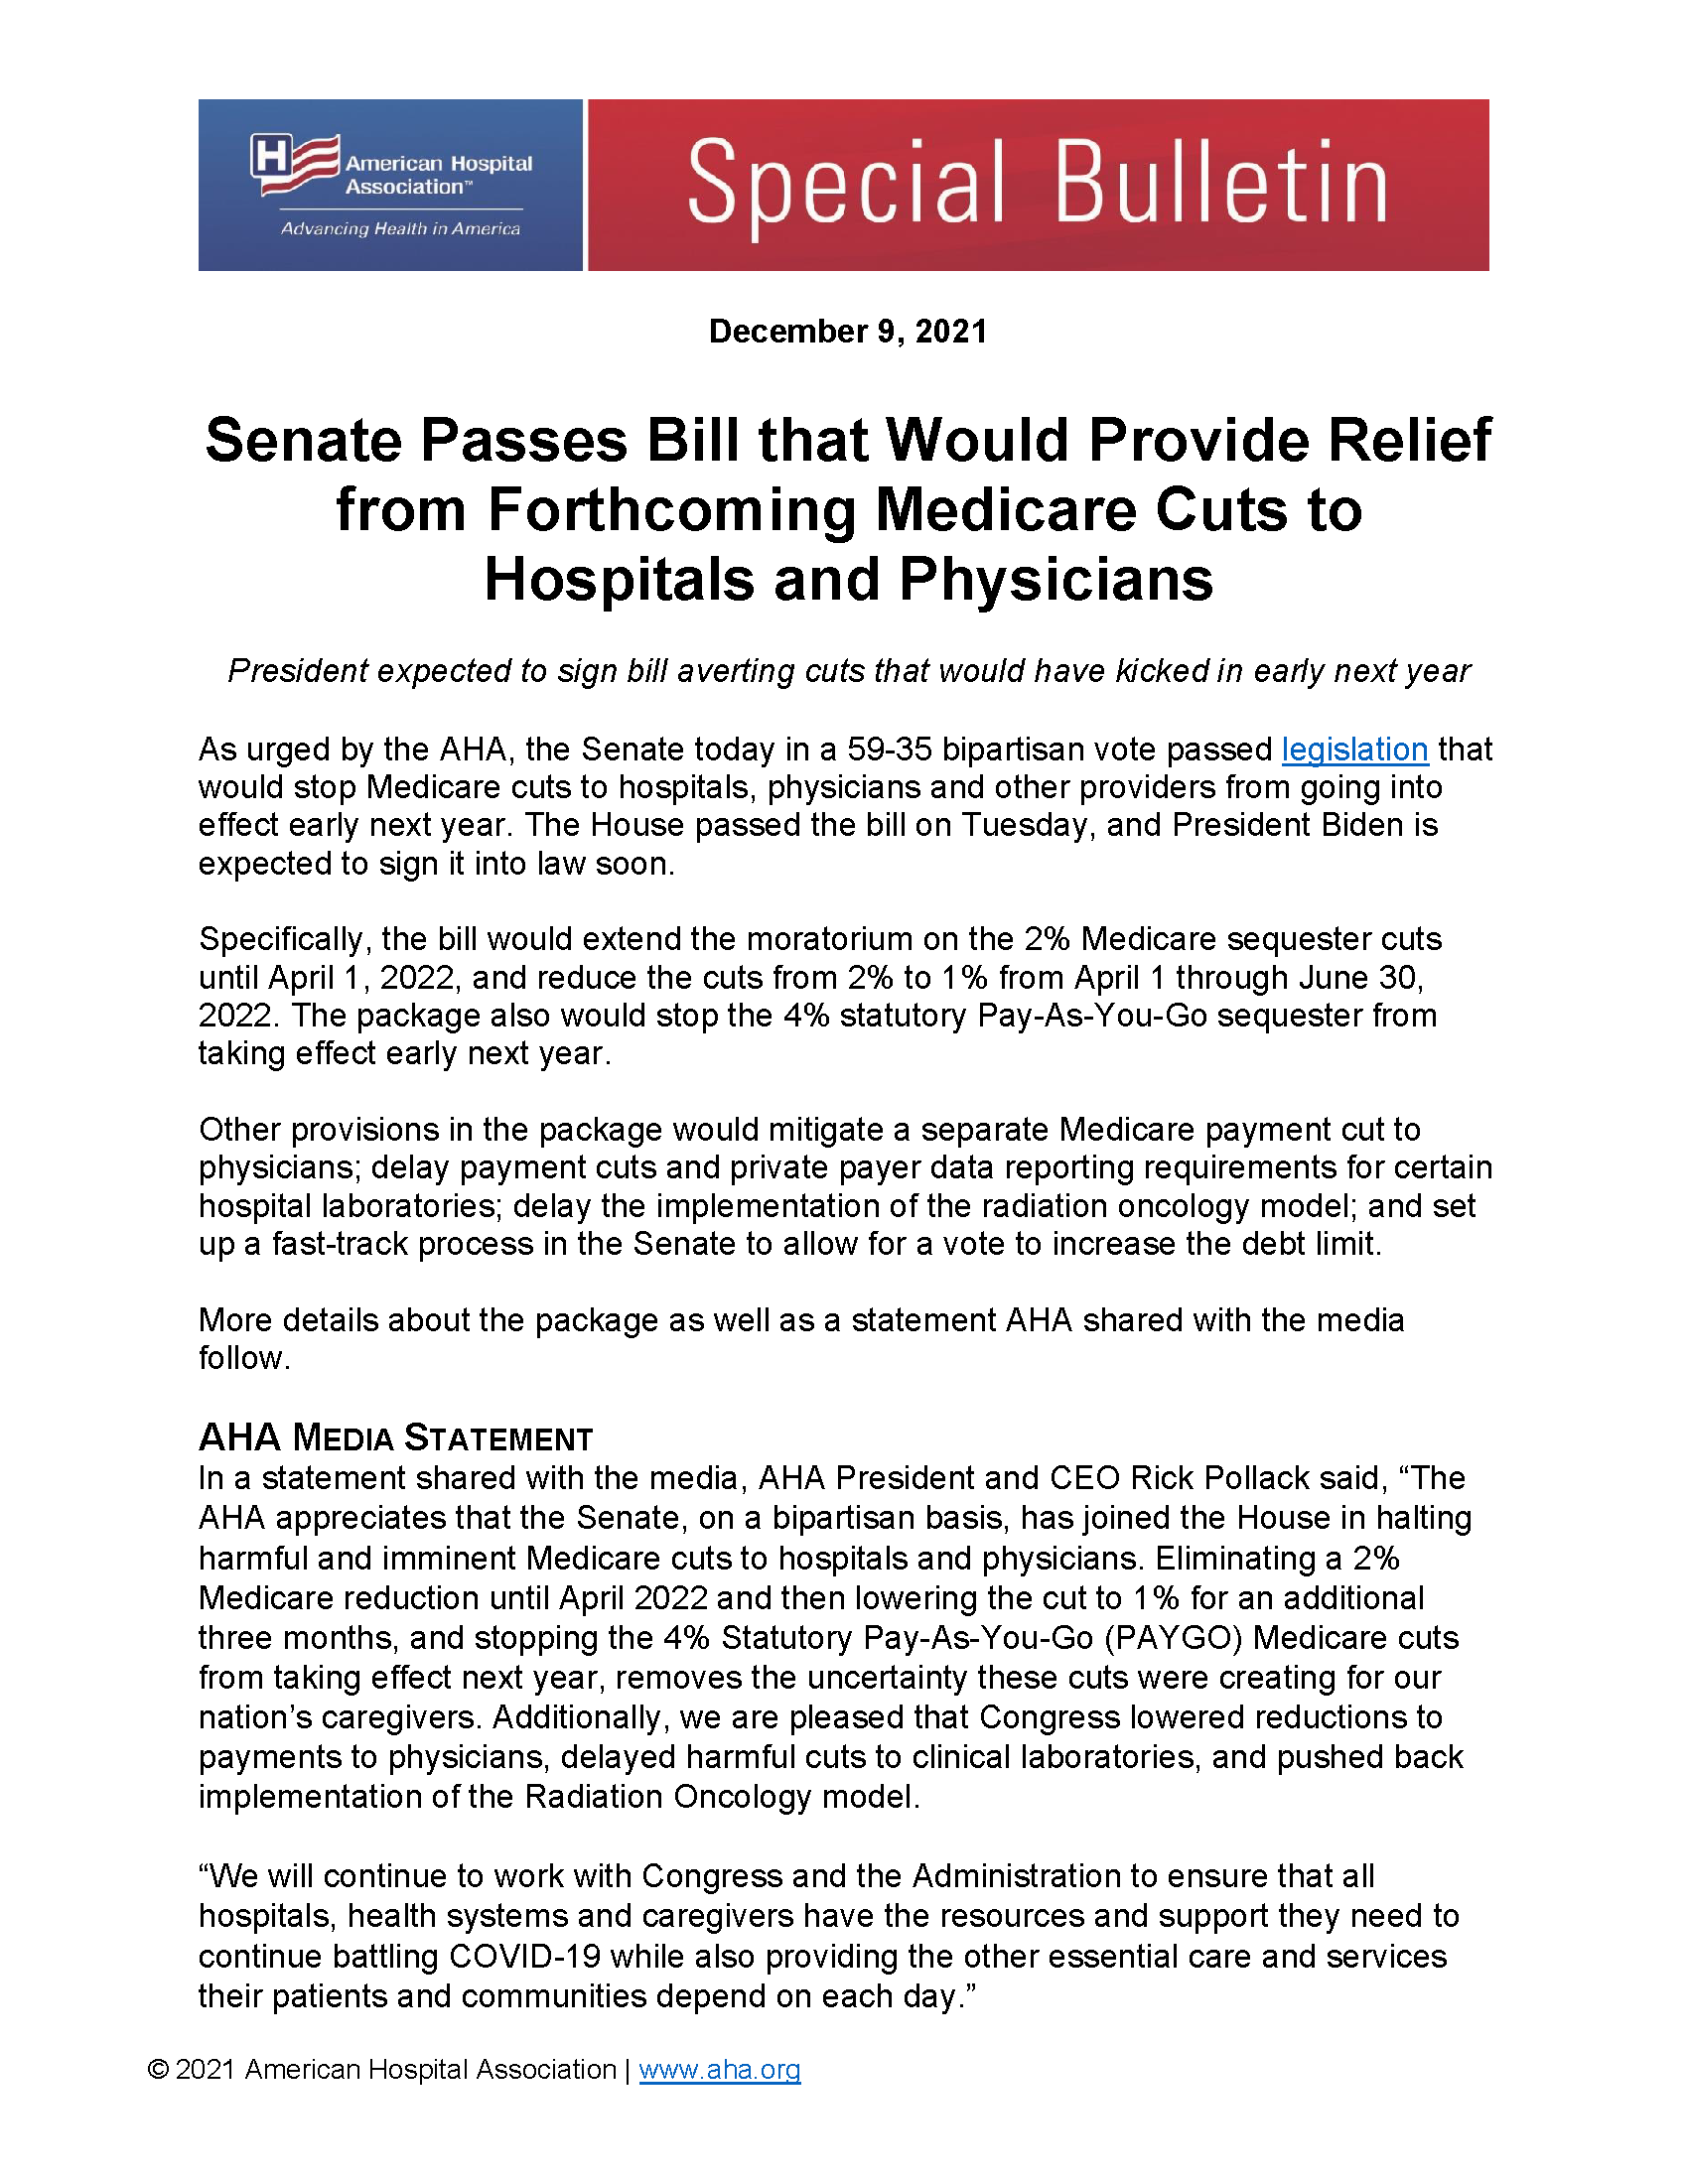 Senate Passes Bill that Would Provide Relief from Forthcoming Medicare Cuts to Hospitals and Physicians page 1.